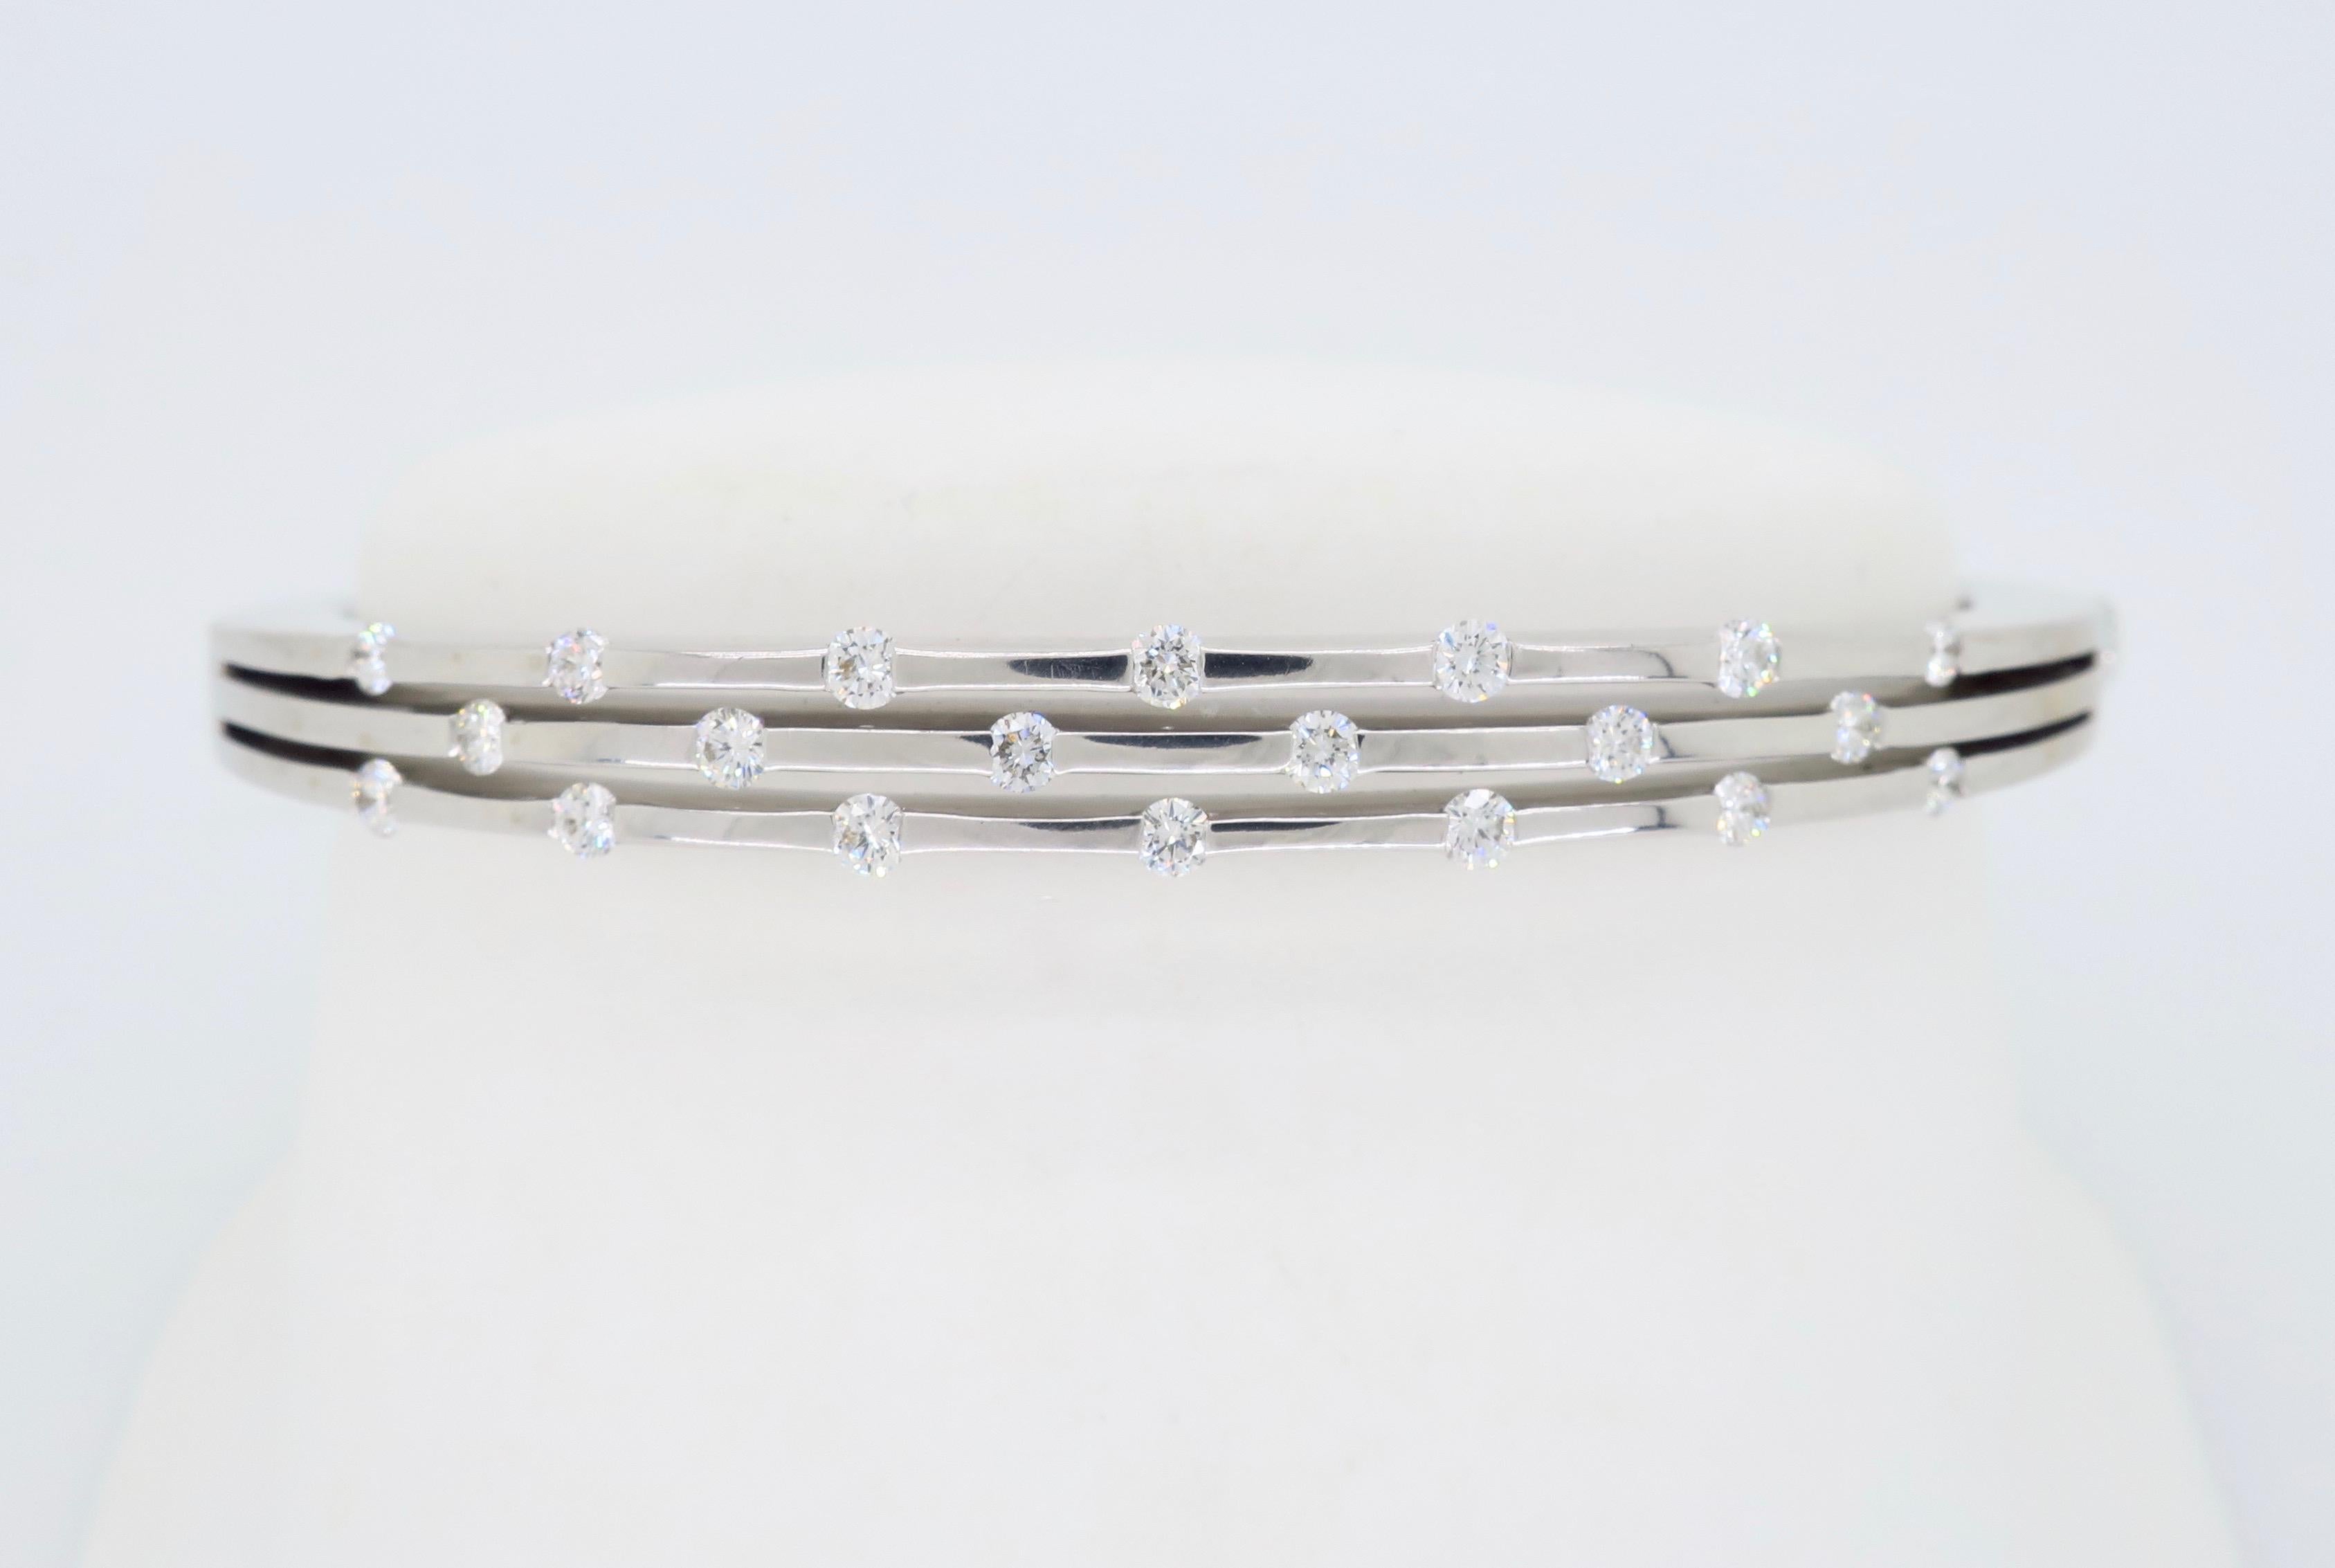 18K white gold Classica Parisienne diamond bangle crafted by designer Roberto Coin.

Designer: Roberto Coin
Diamond Carat Weight: Approximately .65CTW
Diamond Cut: Round Brilliant Cut 
Color: Average G-H
Clarity: Average VS
Metal: 18K White